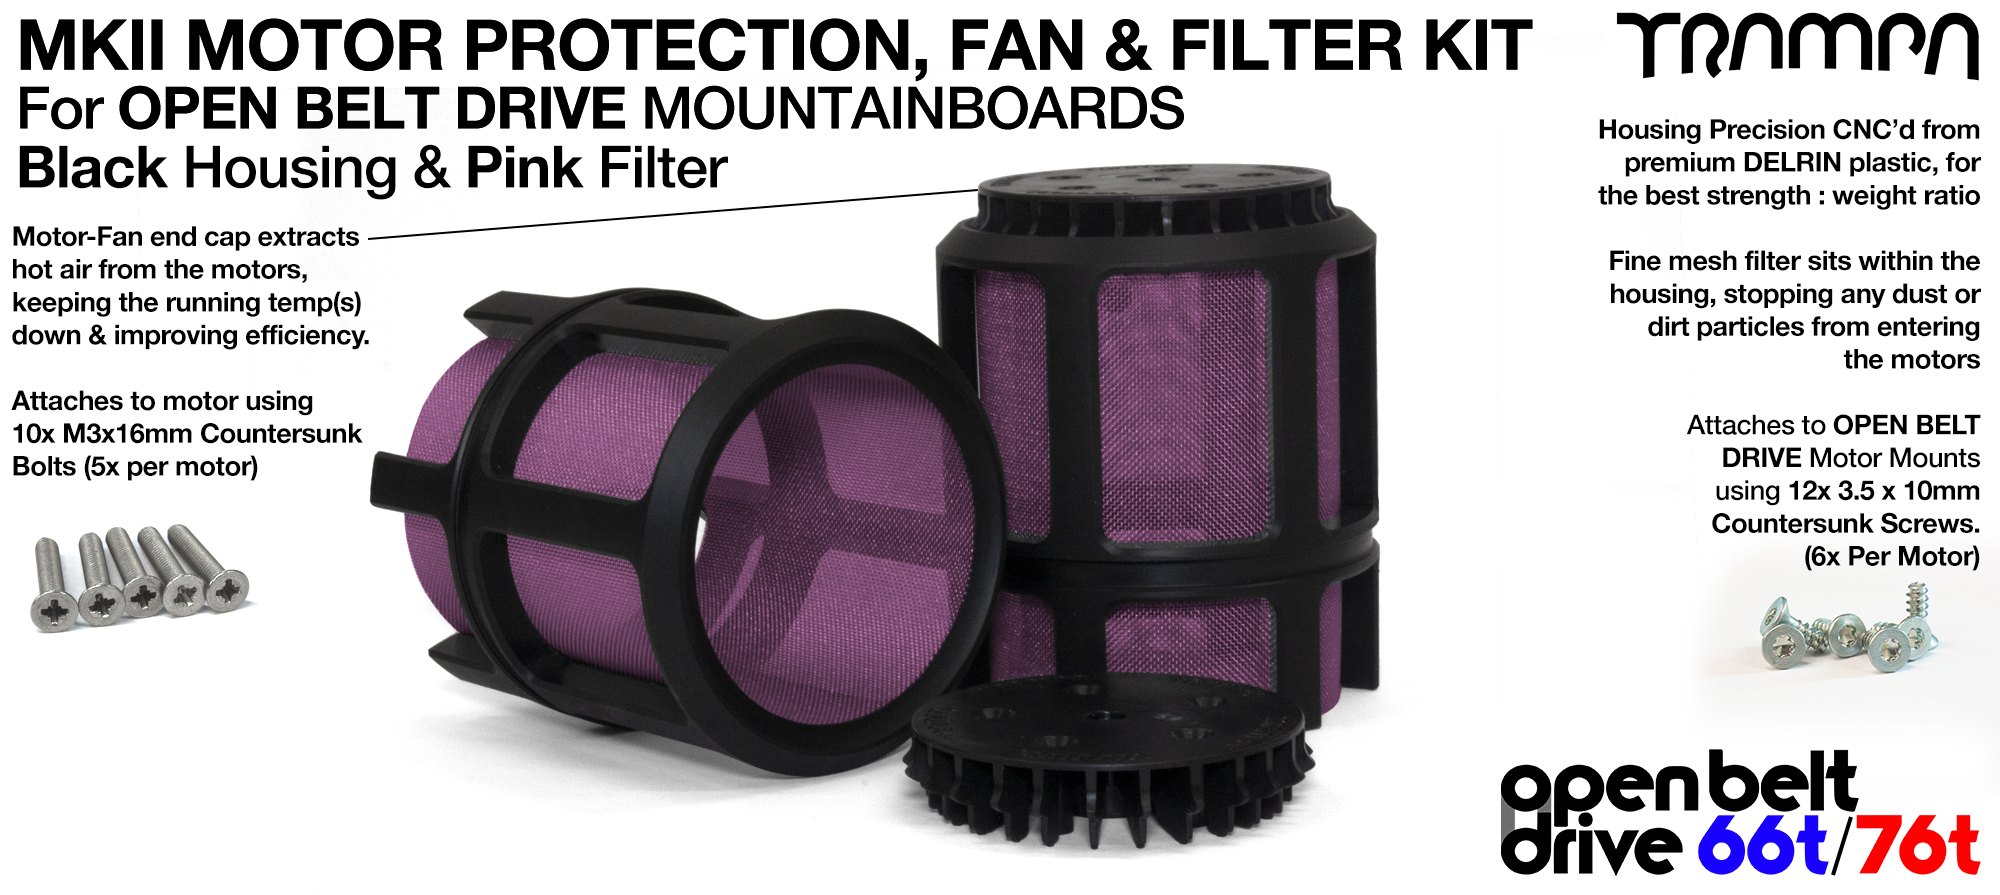 FULL CAGE Motor protection SUPER STRONG DELRIN Plastic includes Fan & PINK Filter - TWIN